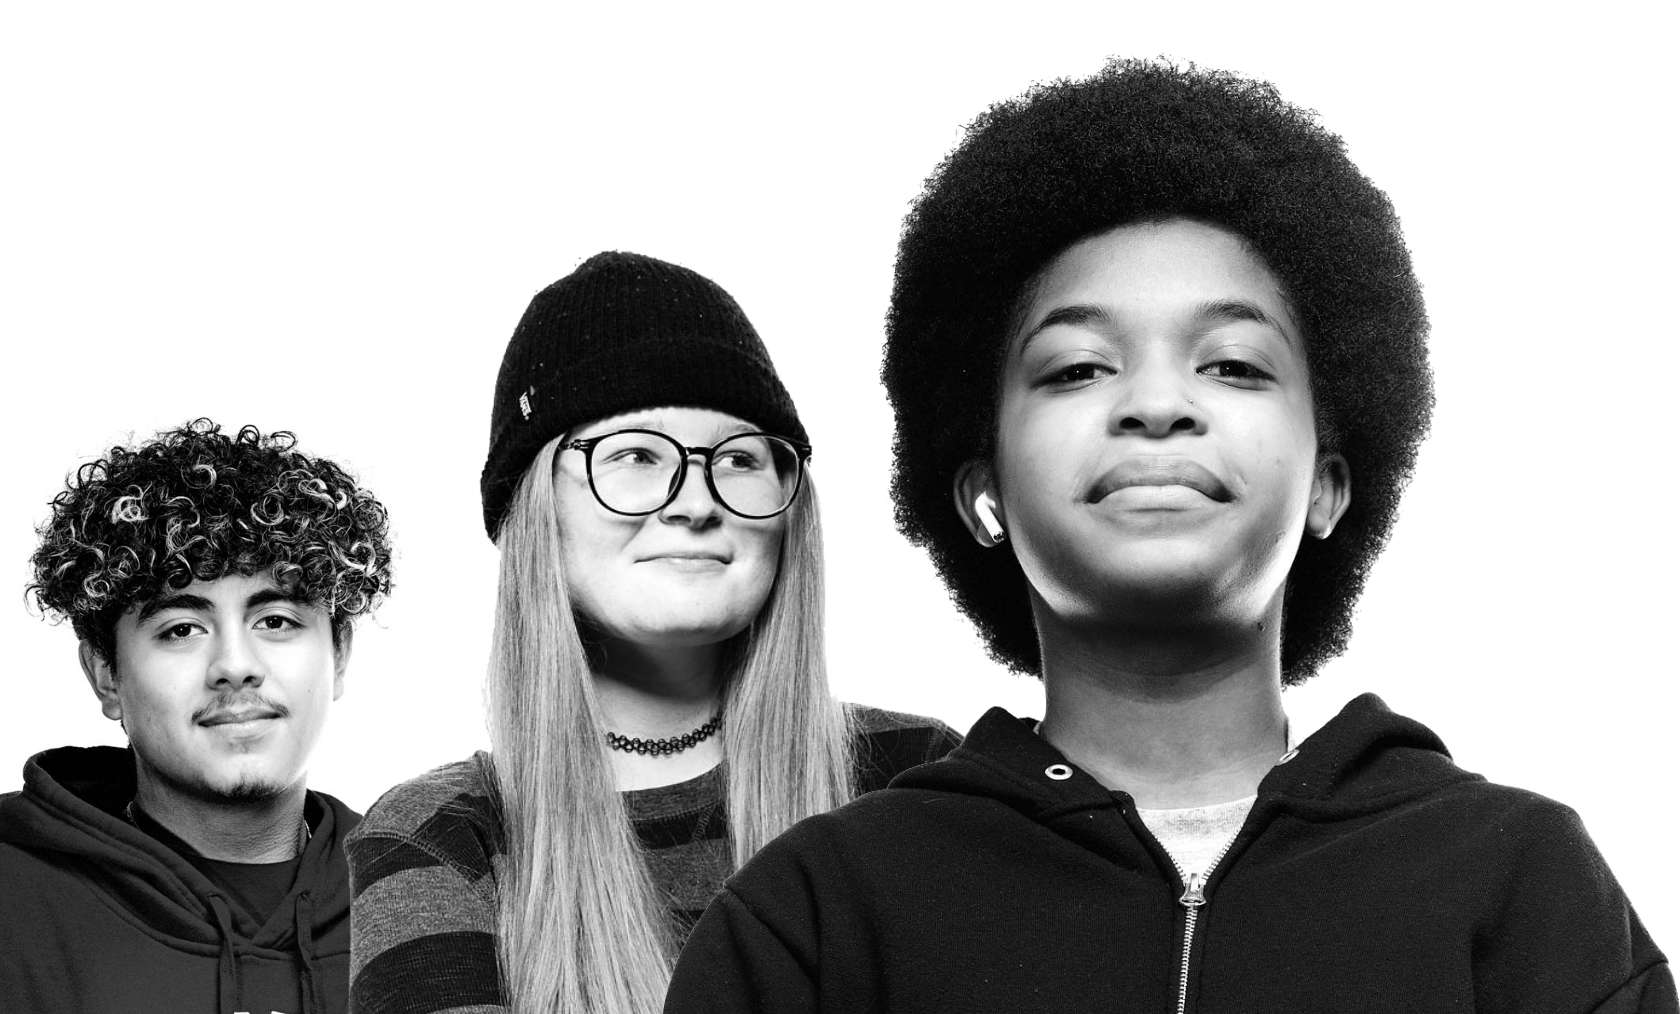 Three student heroes, black and white photography, looking at camera.